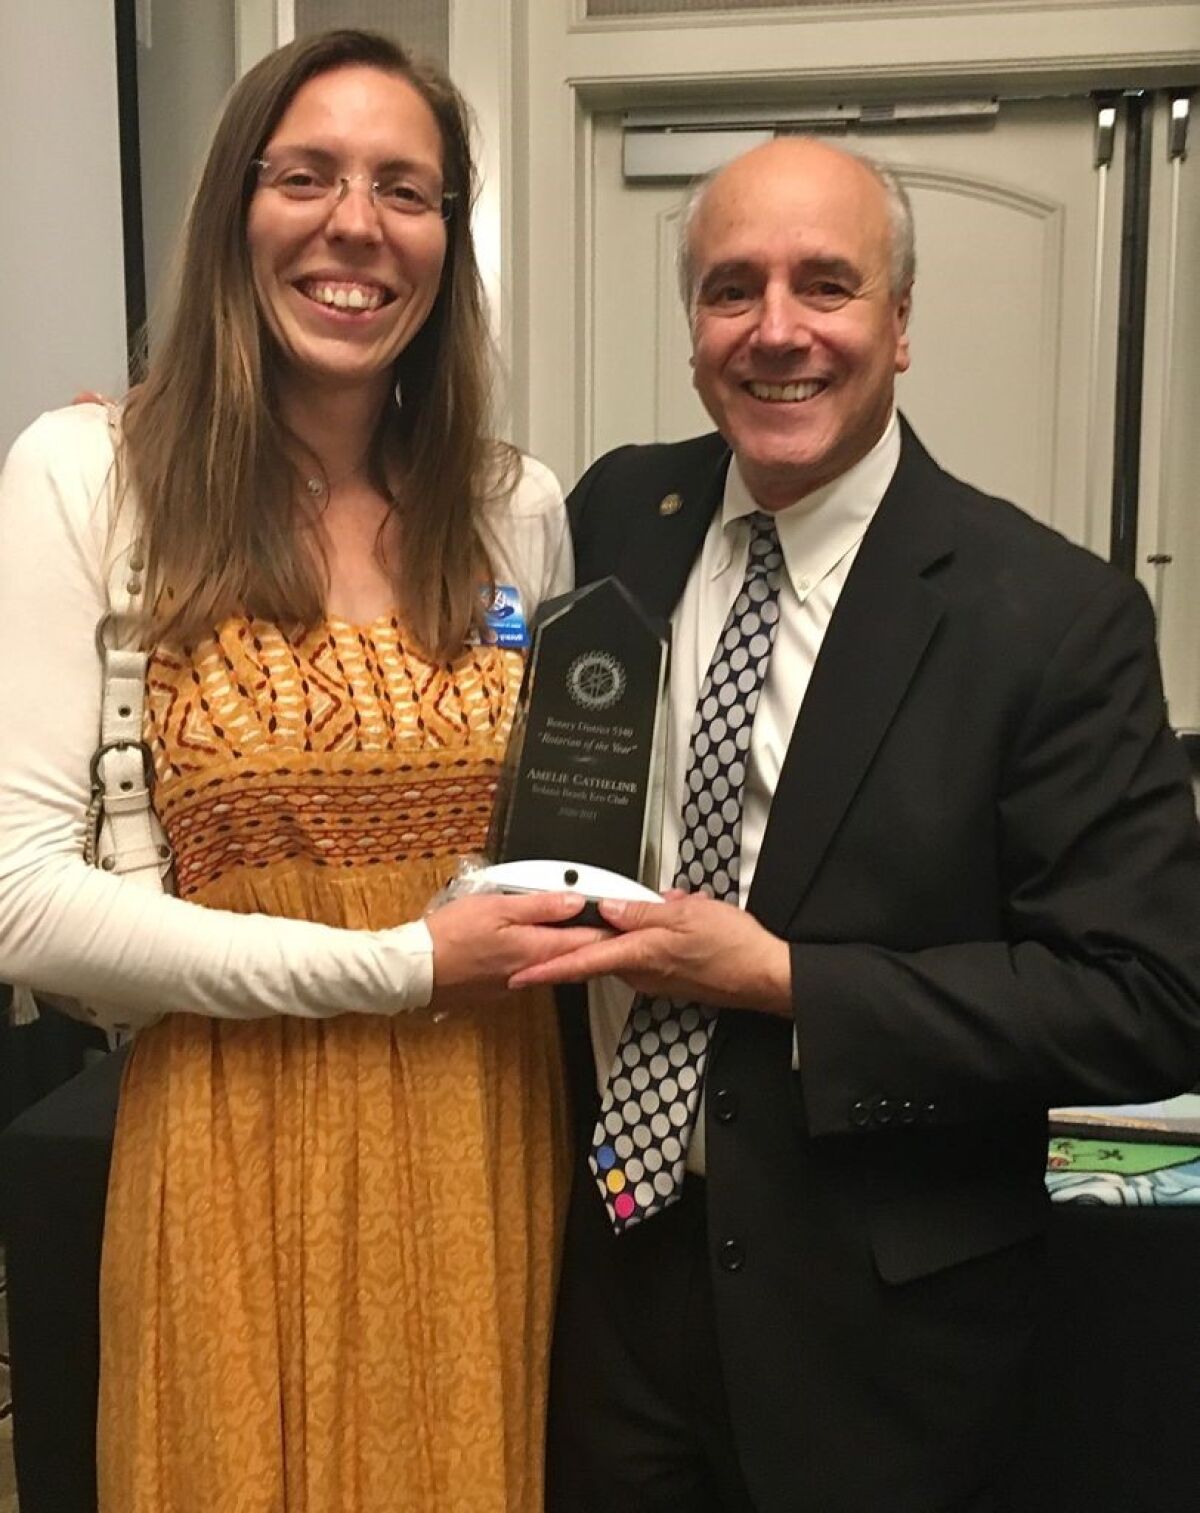 Amélie Catheline, Ph.D. receives her award from Steve Weitzen, District Governor of Rotary District 5340.